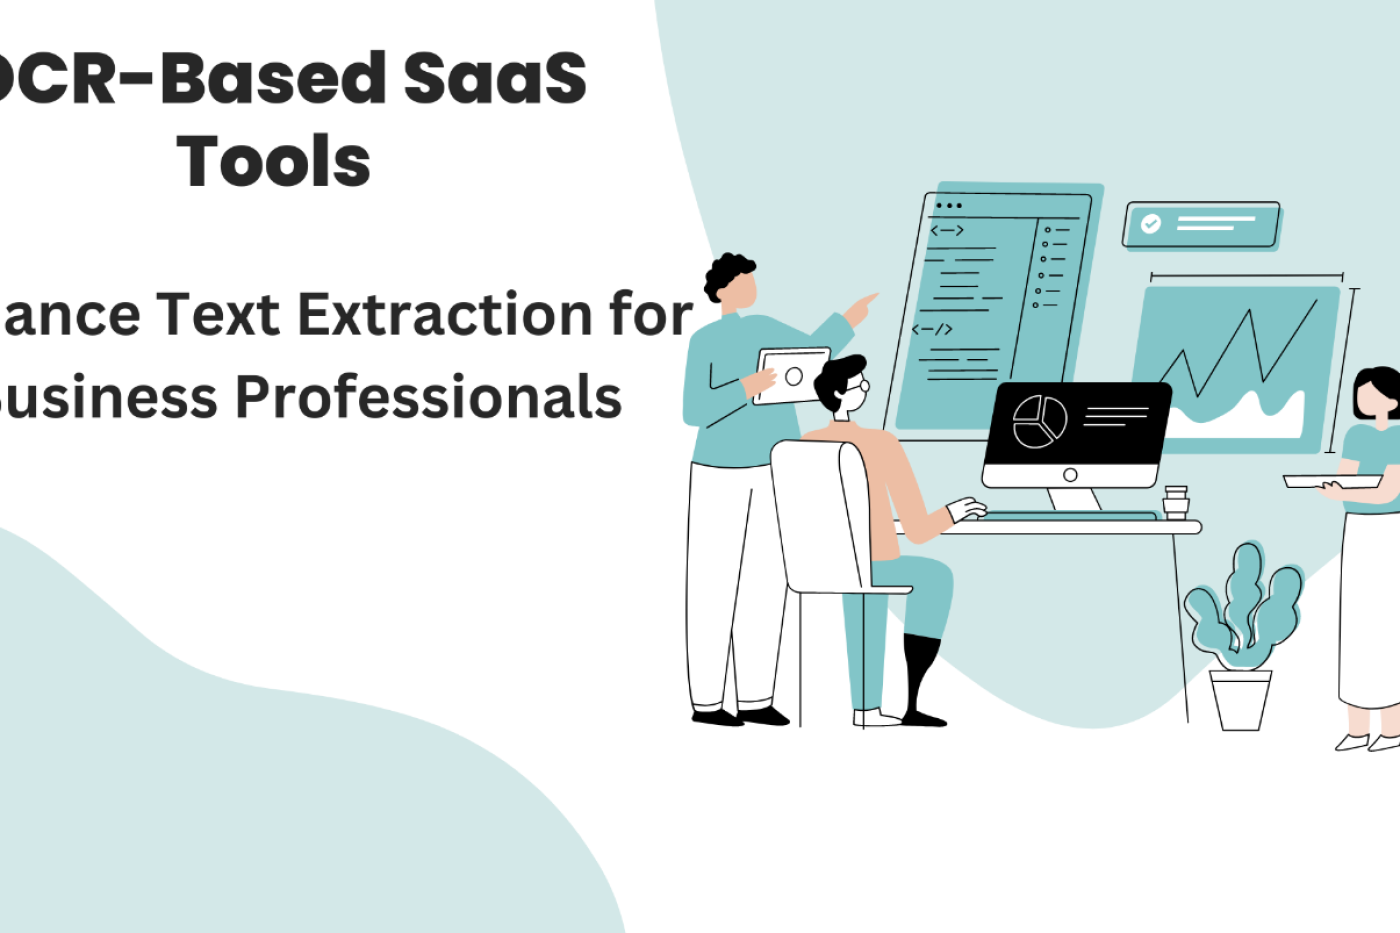 How OCR-Based SaaS Tools Enhance Text Extraction for Business Professionals